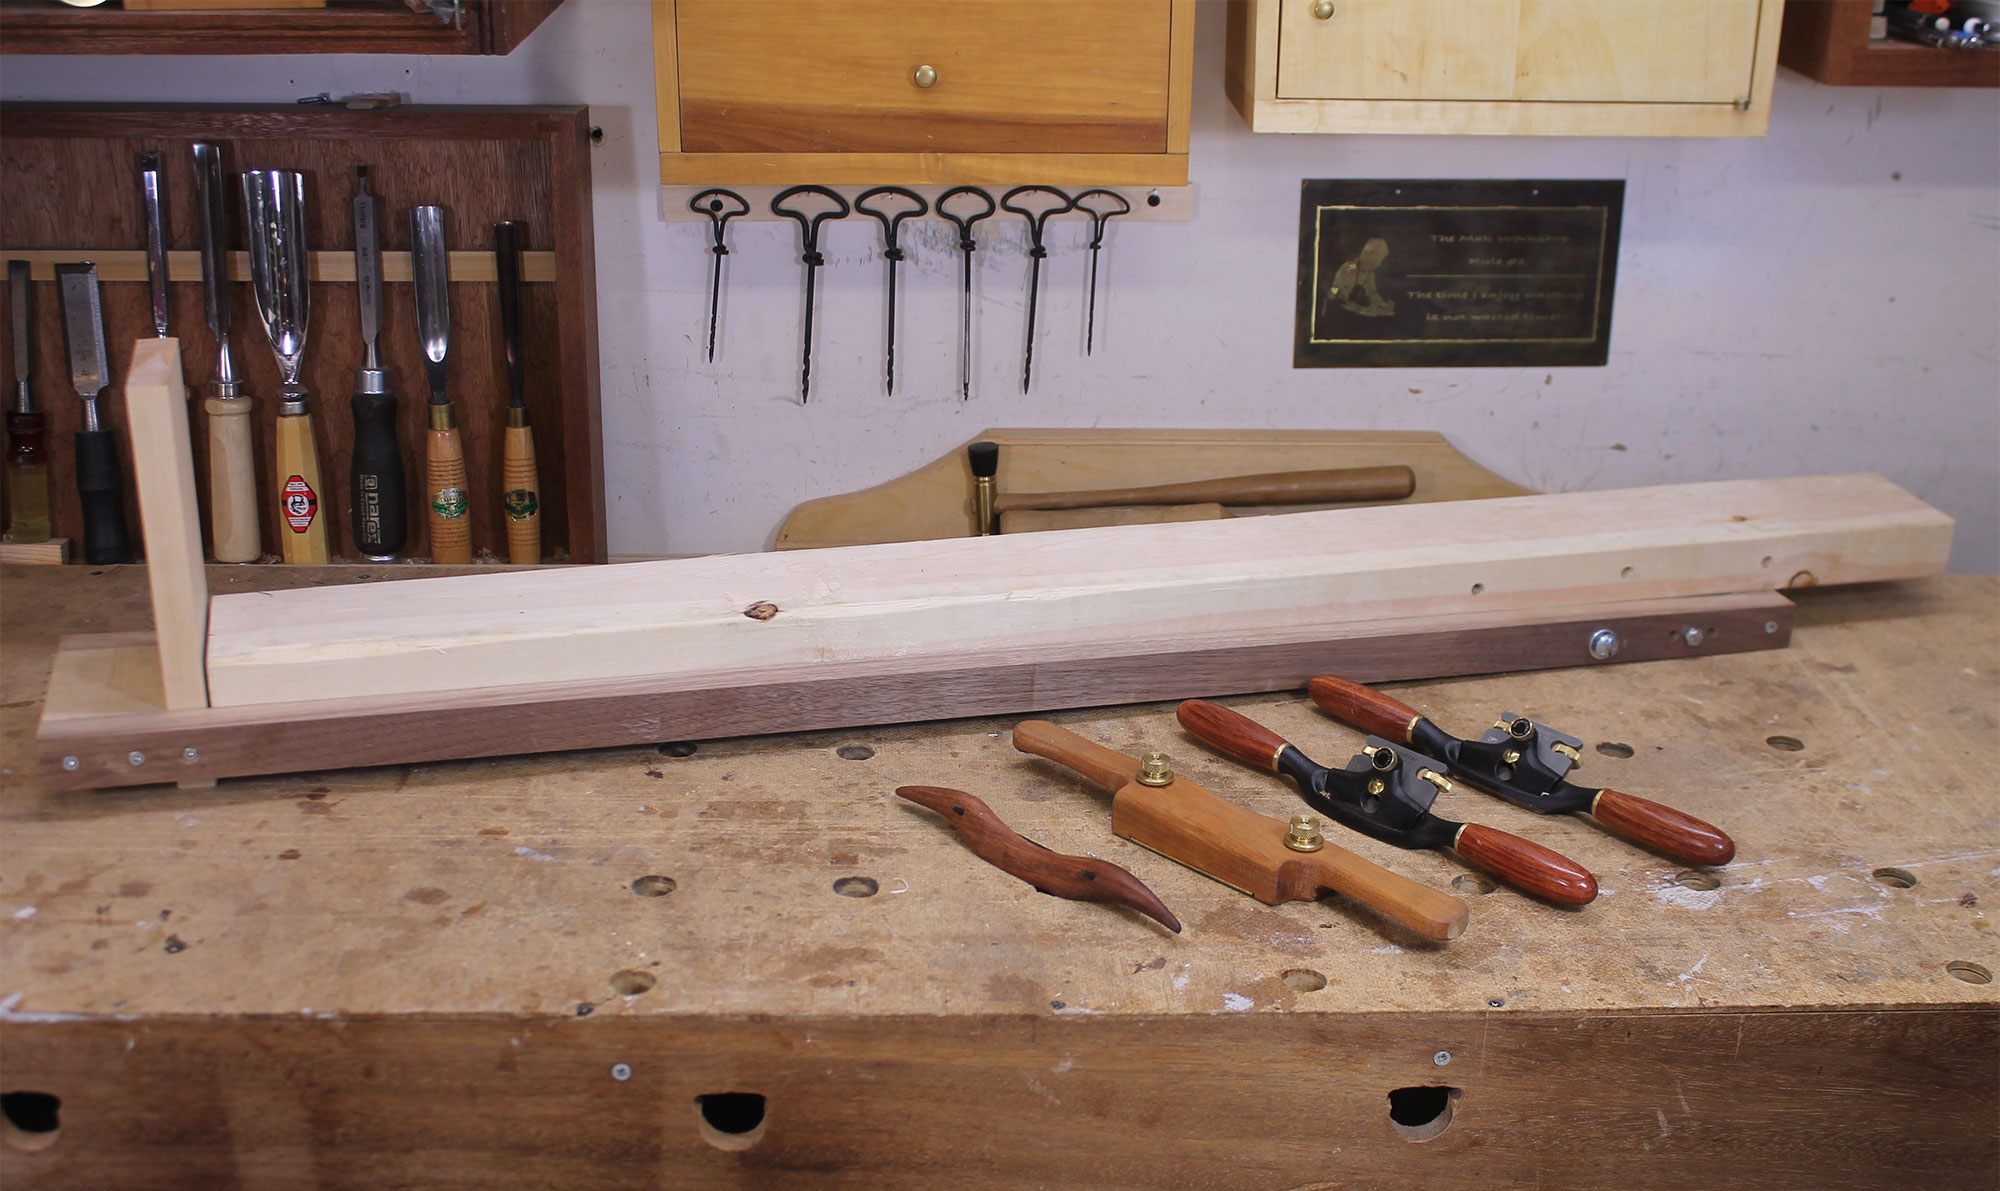 The fixture and several spokeshaves on the author’s workbench.